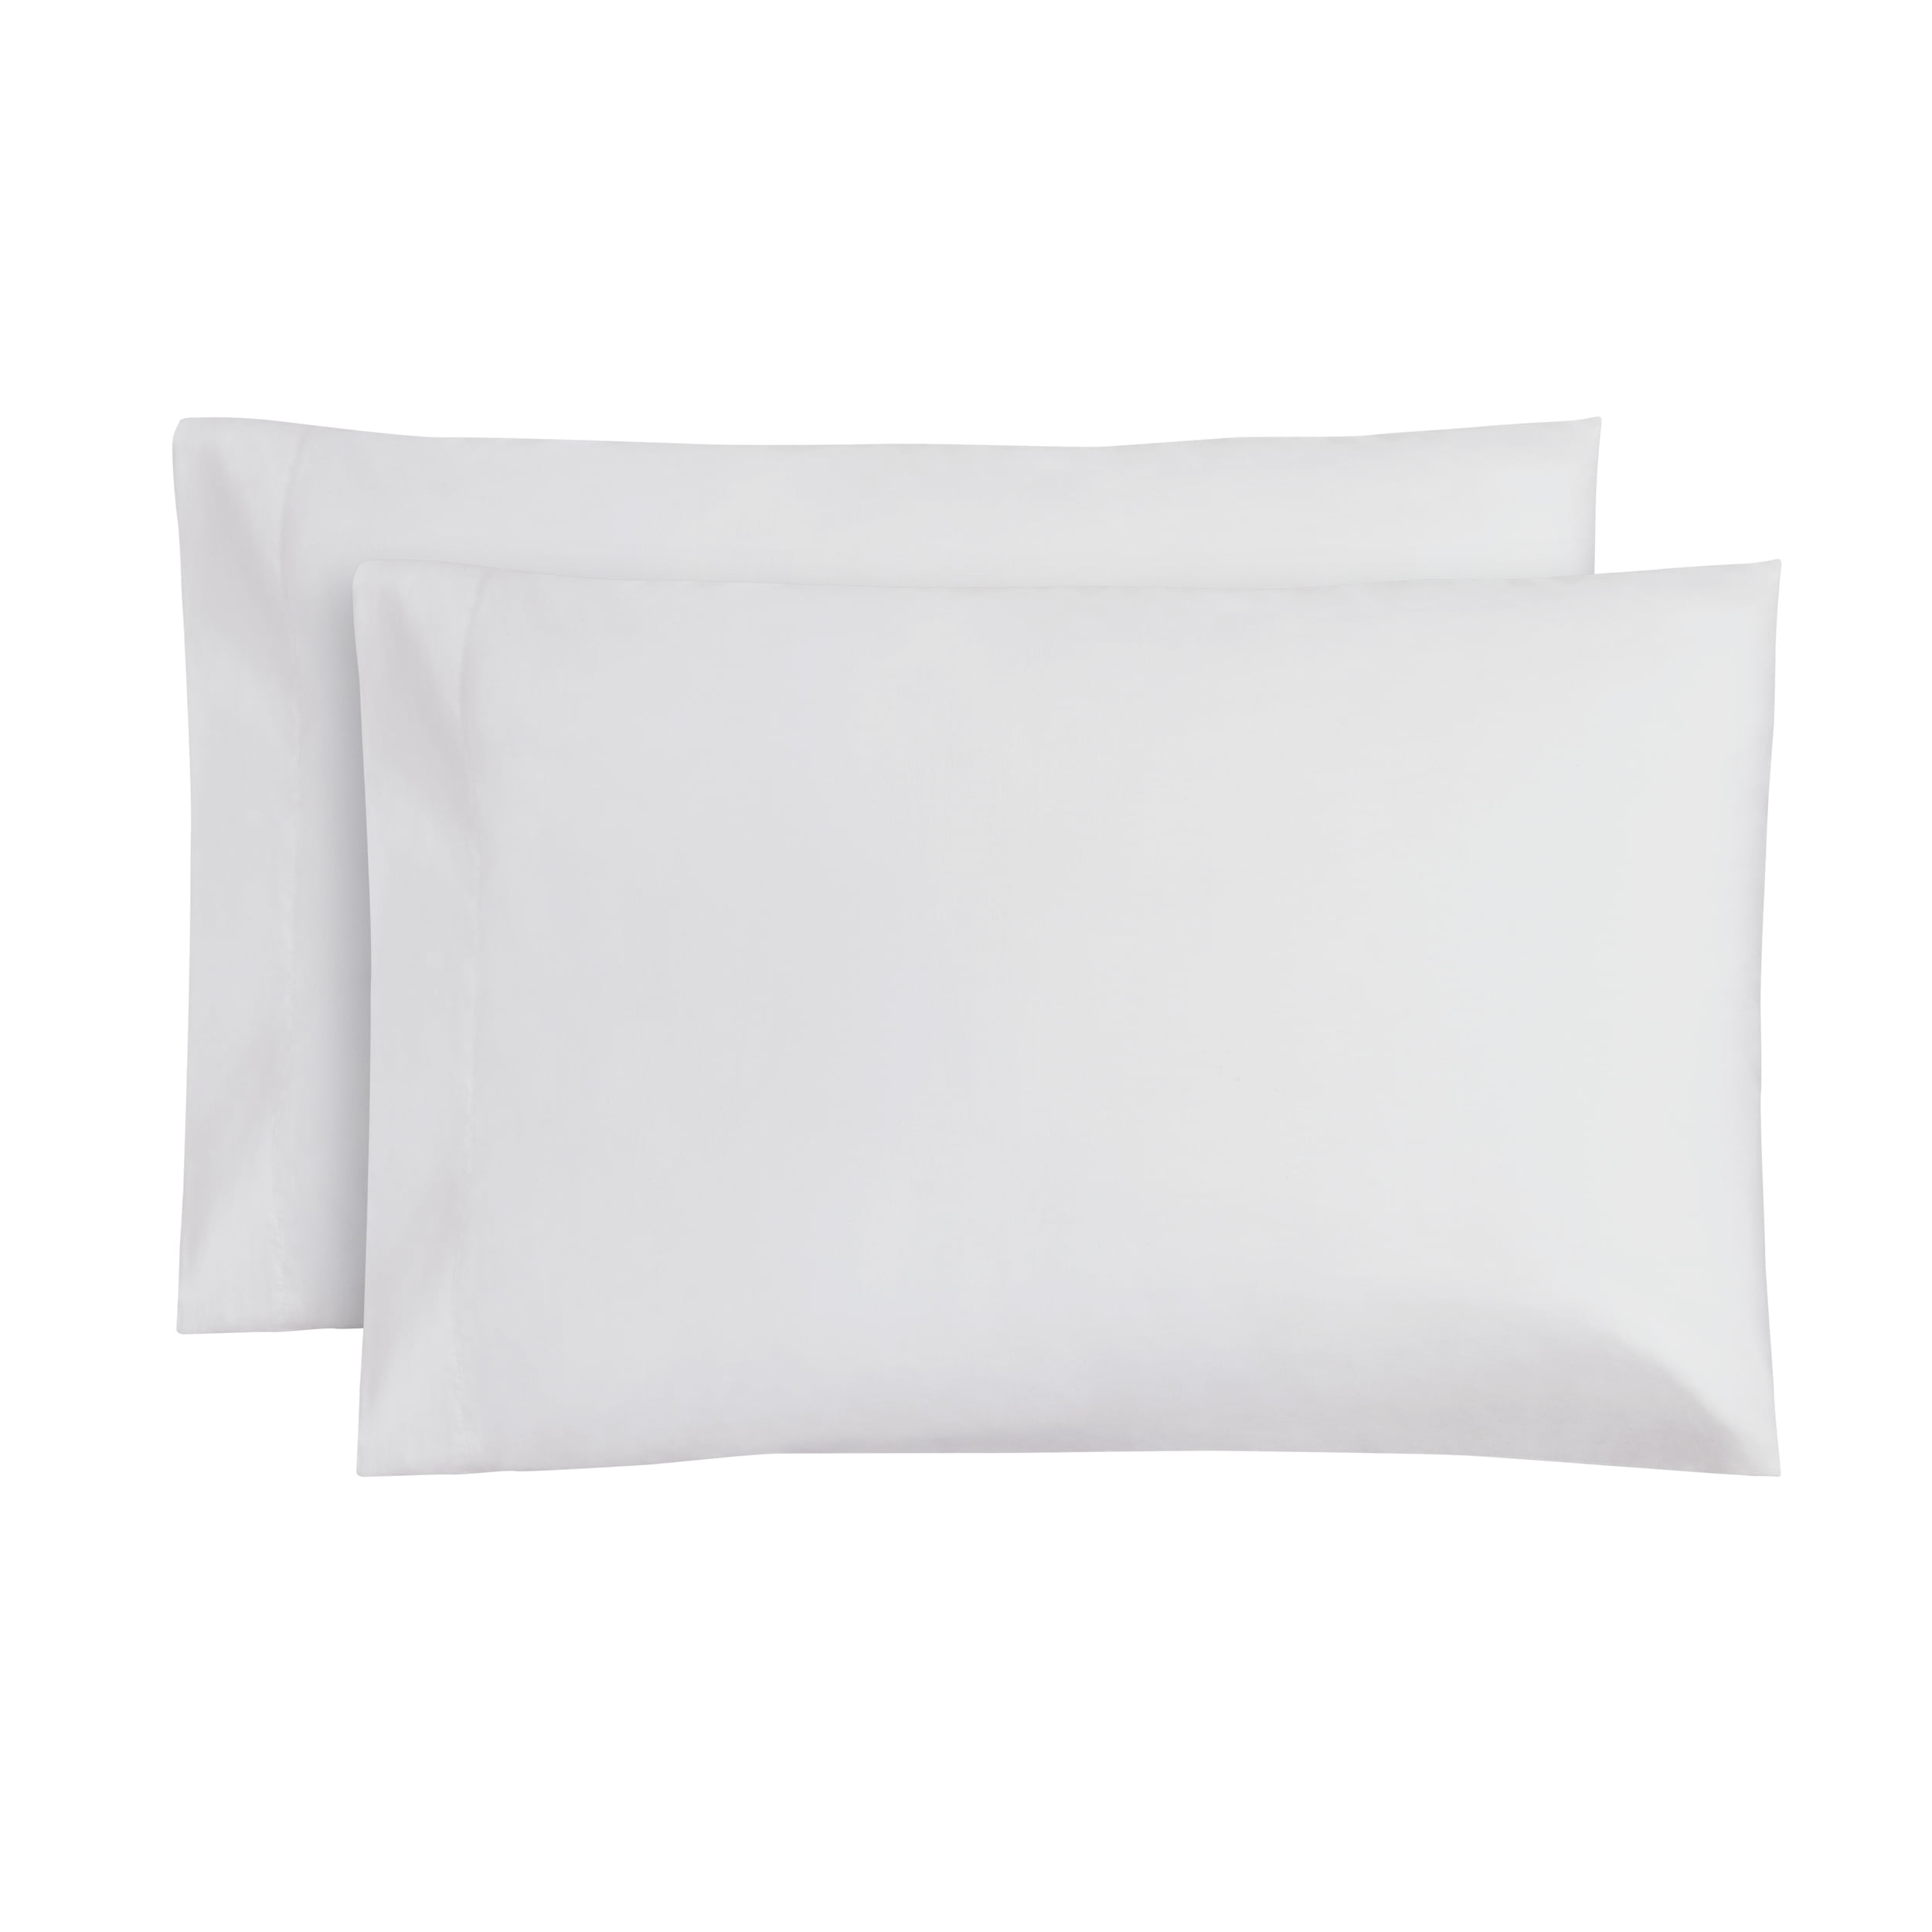 Mainstays 2-Piece 300 Thread Count Easy Care Percale Pillowcase Set, White, Queen